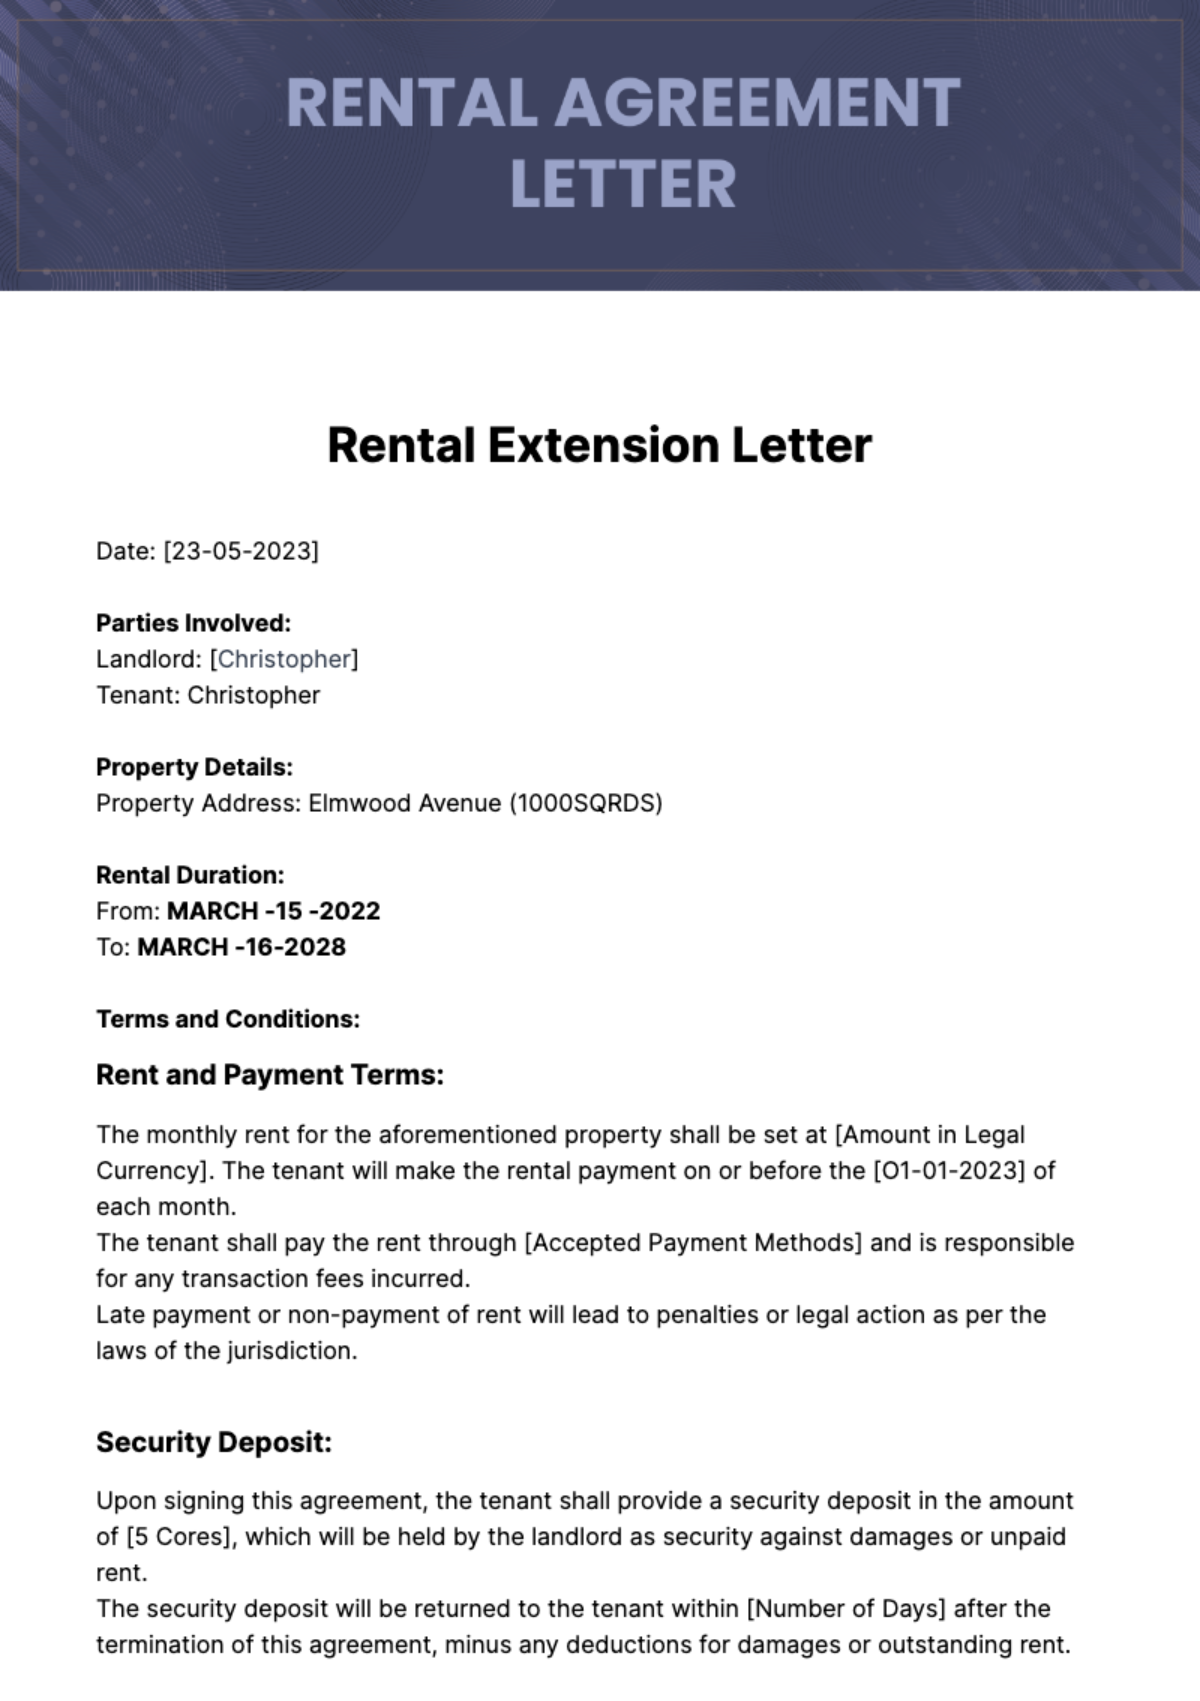 Free Rental Extension Letter Template